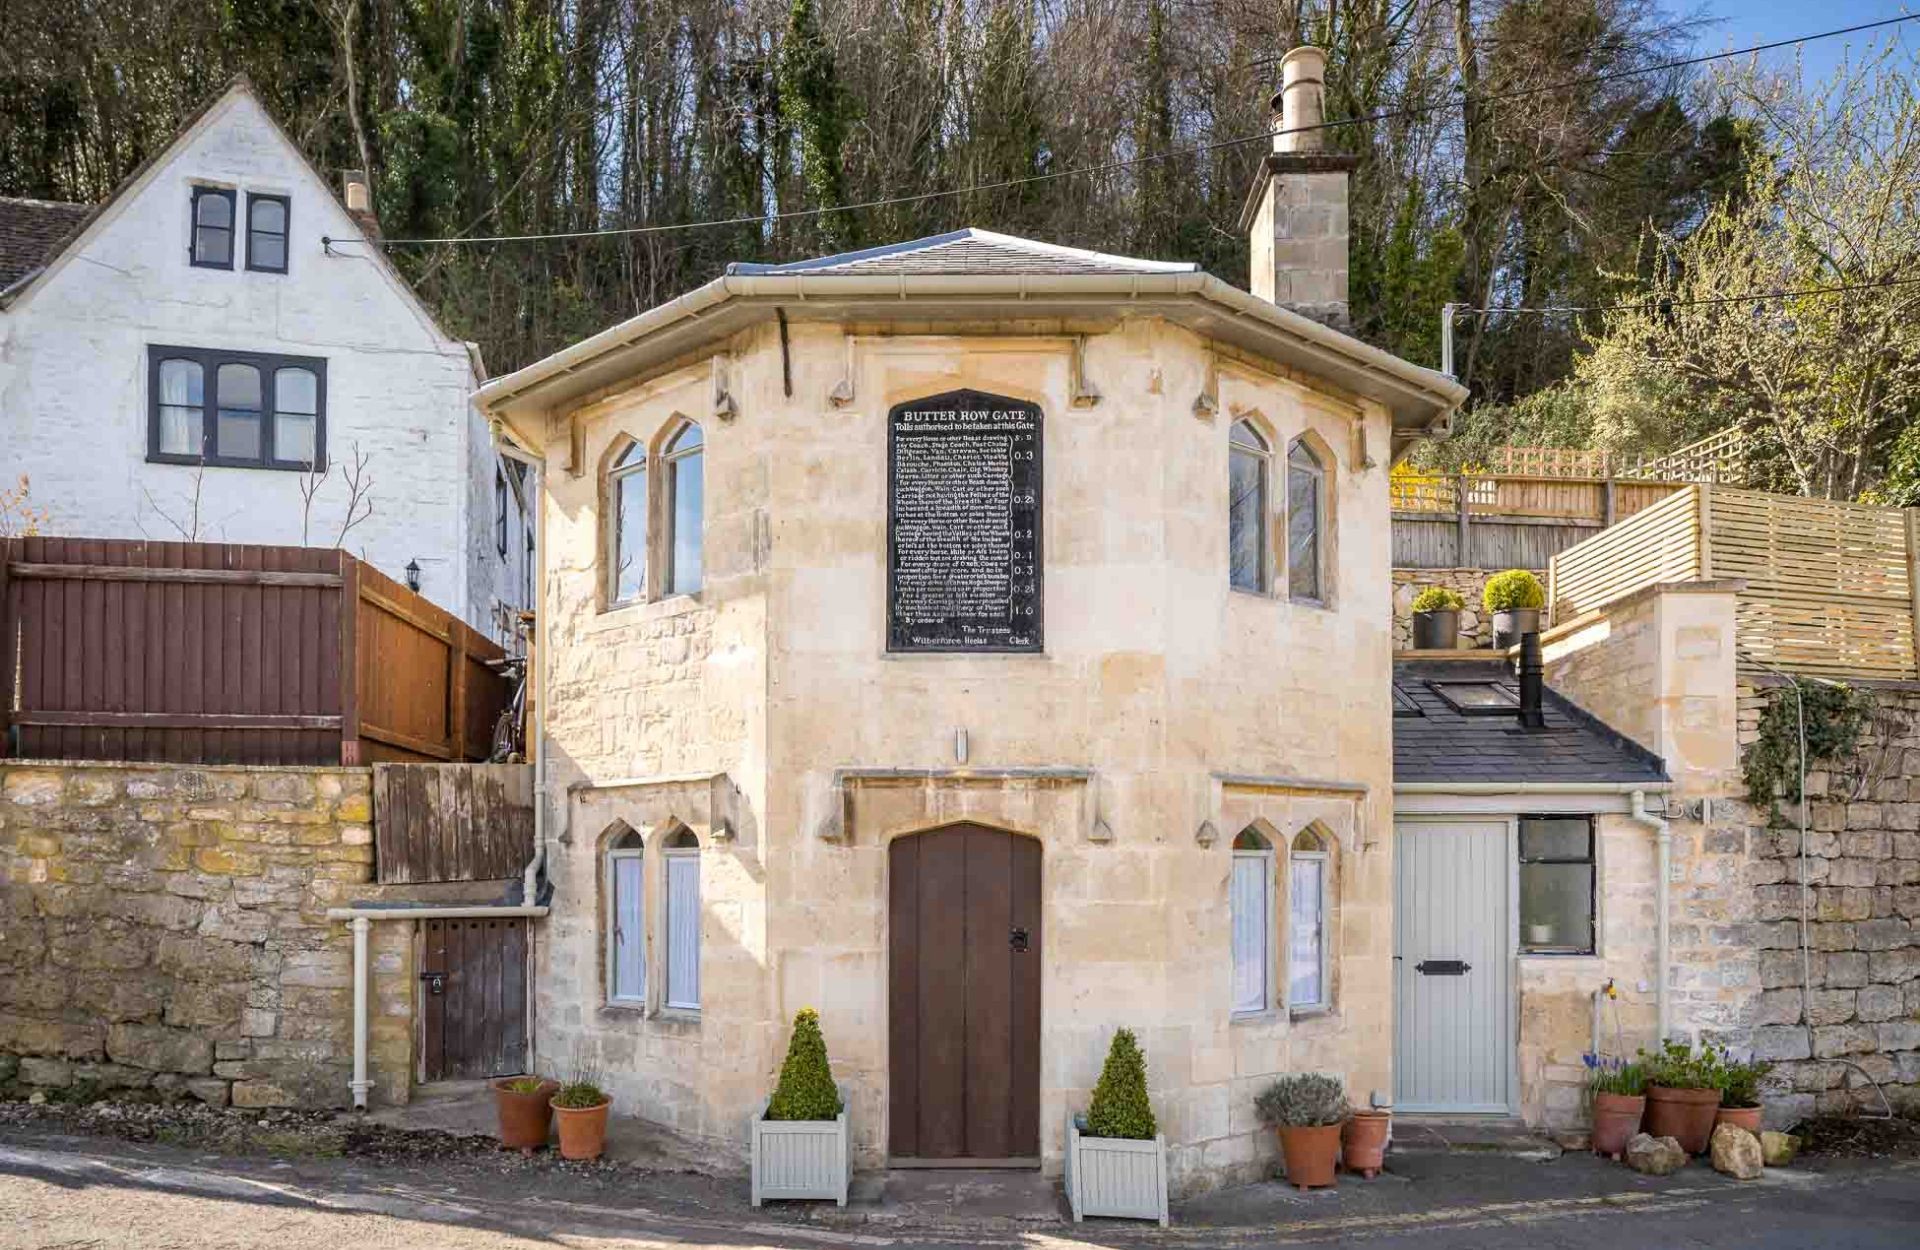 Gloucestershire Holiday Cottages: Butterow Gate, Stroud | sykescottages.co.uk 